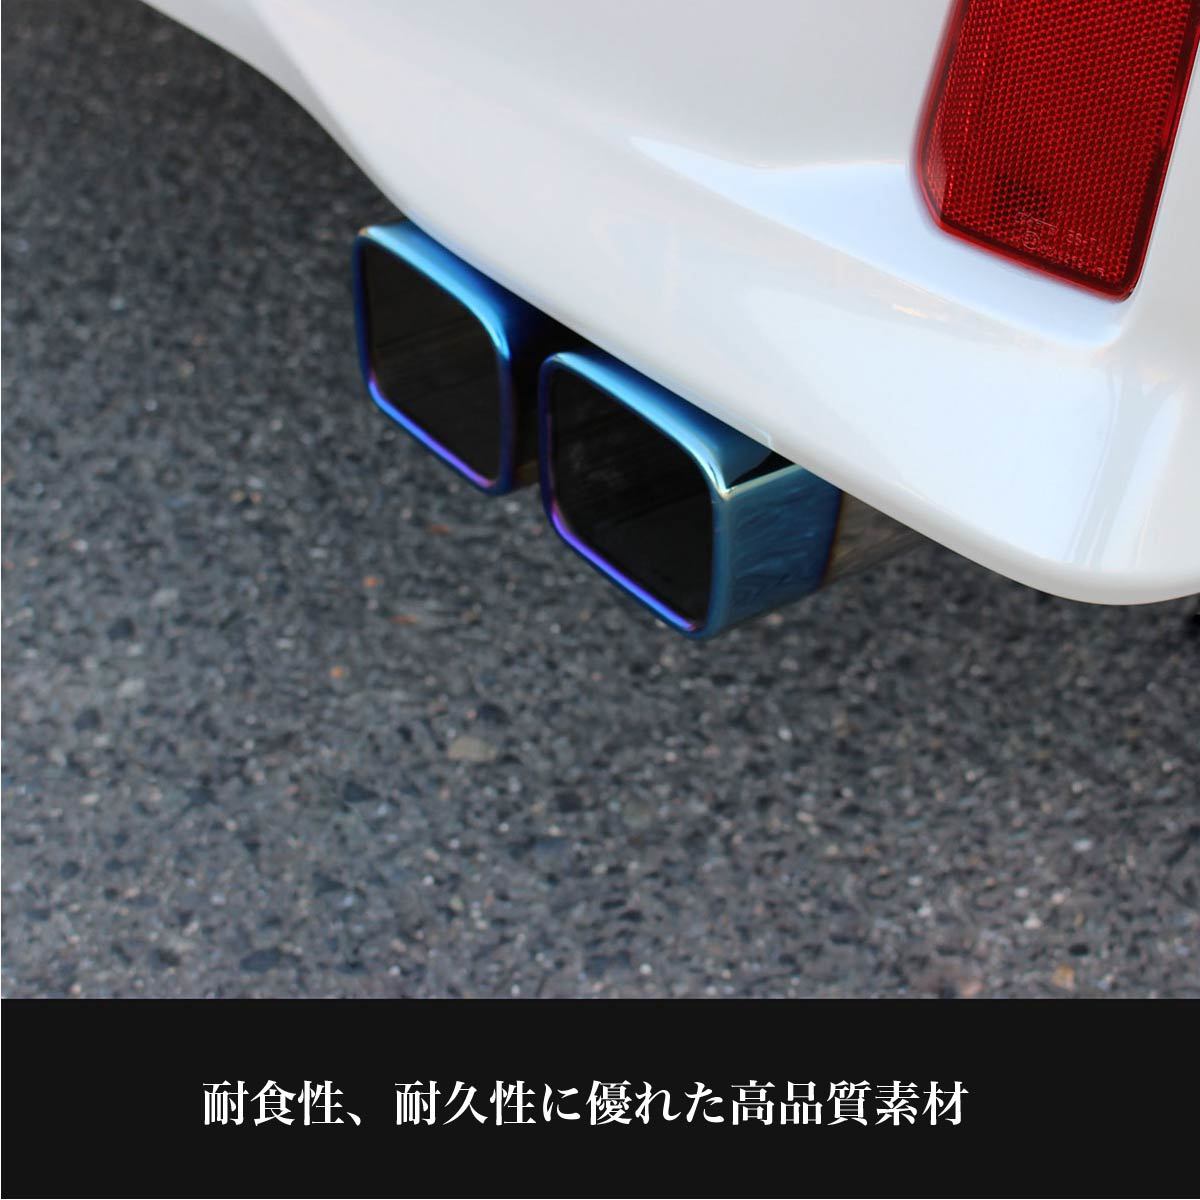  Toyota Alphard Vellfire 30 series square muffler cutter made of stainless steel titanium color accessories exterior parts car make special design 3